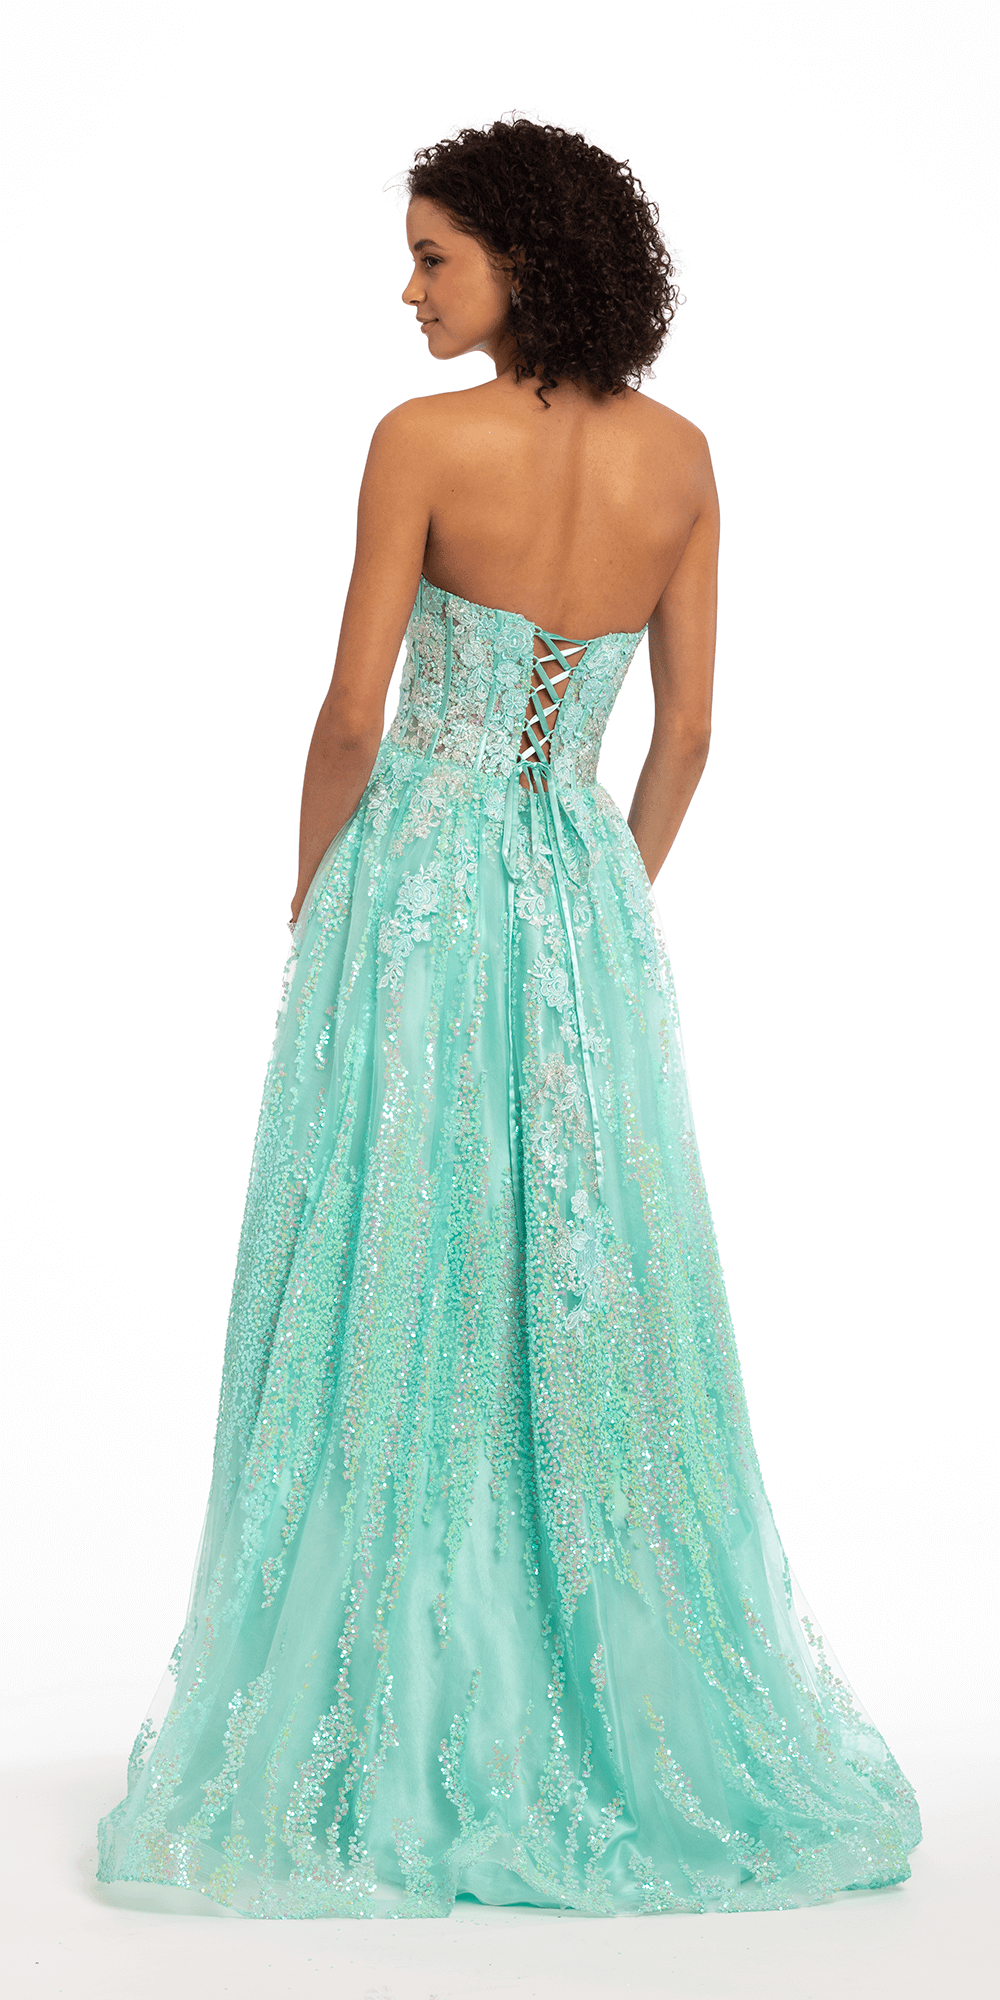 Camille La Vie Iridescent Sequin Corset Ballgown with Lace Up Back